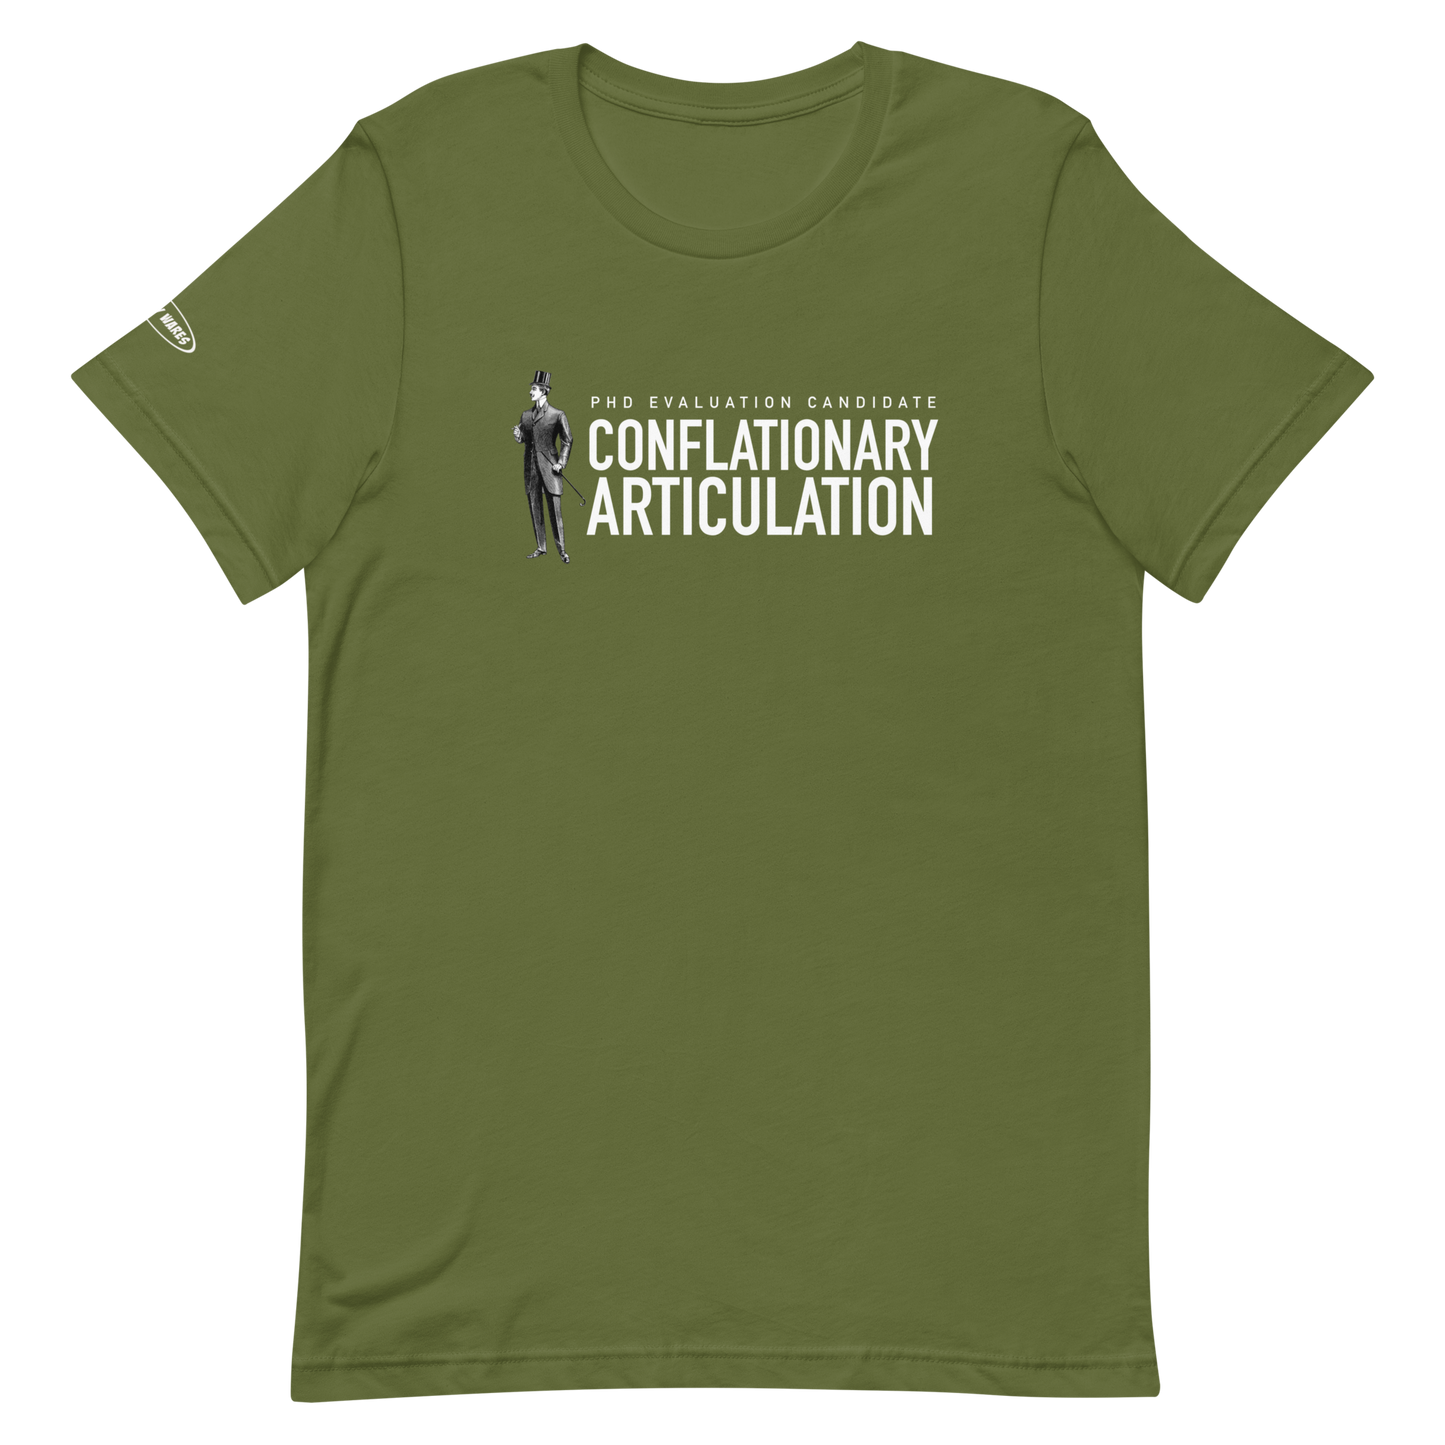 PHD Evaluation Candidate - Conflationary Articulation - Funny t-shirt